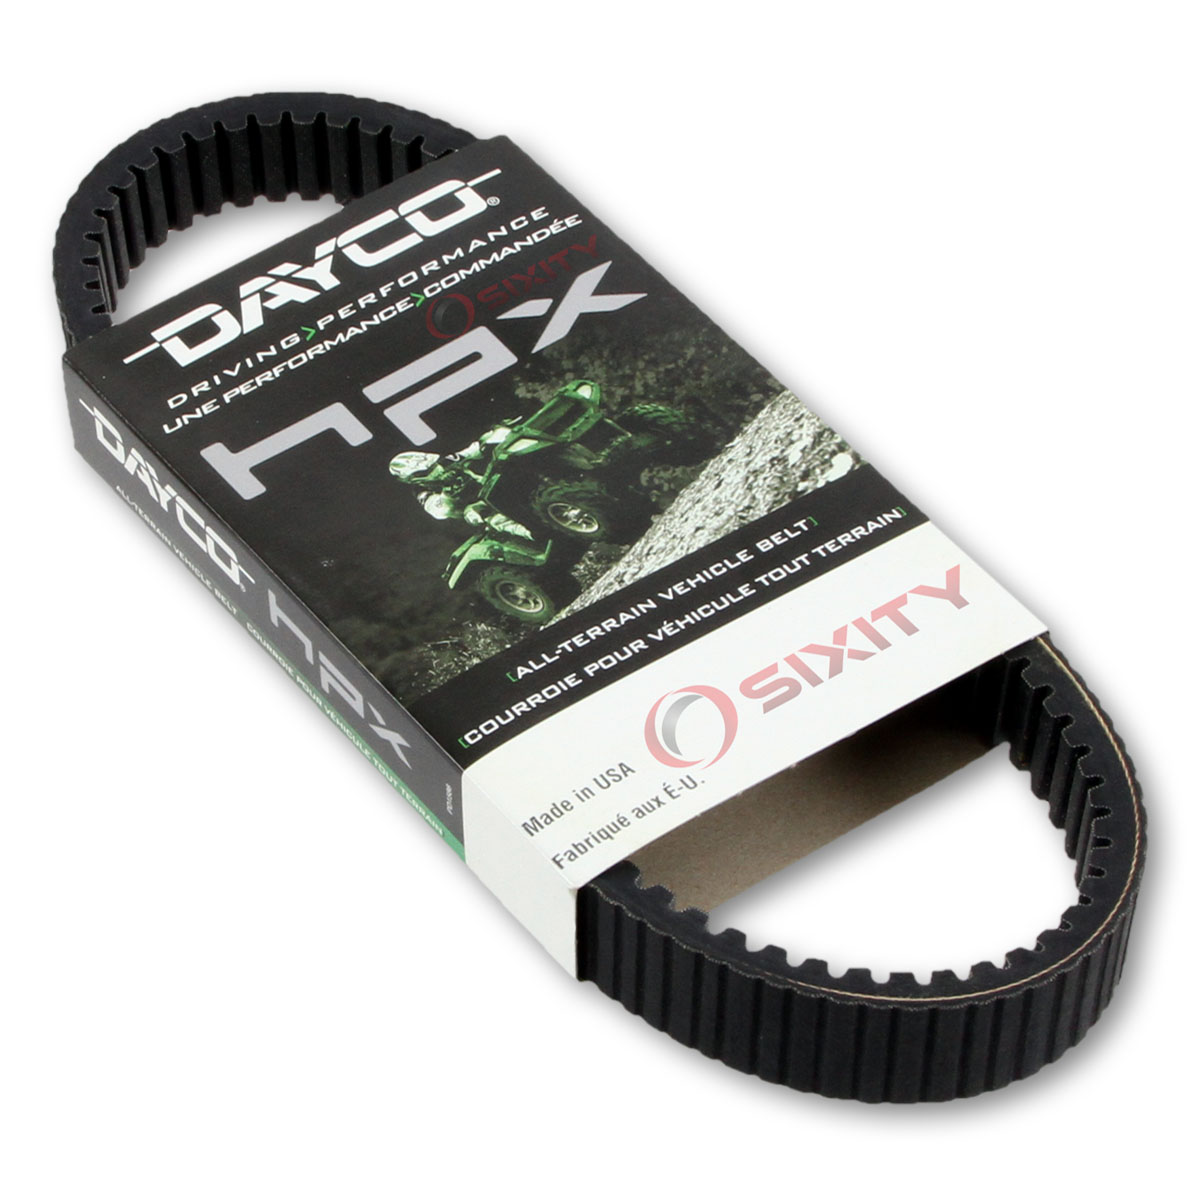 Dayco HPX Drive Belt for 2010 Arctic Cat 550 TRV S GT - High Performance